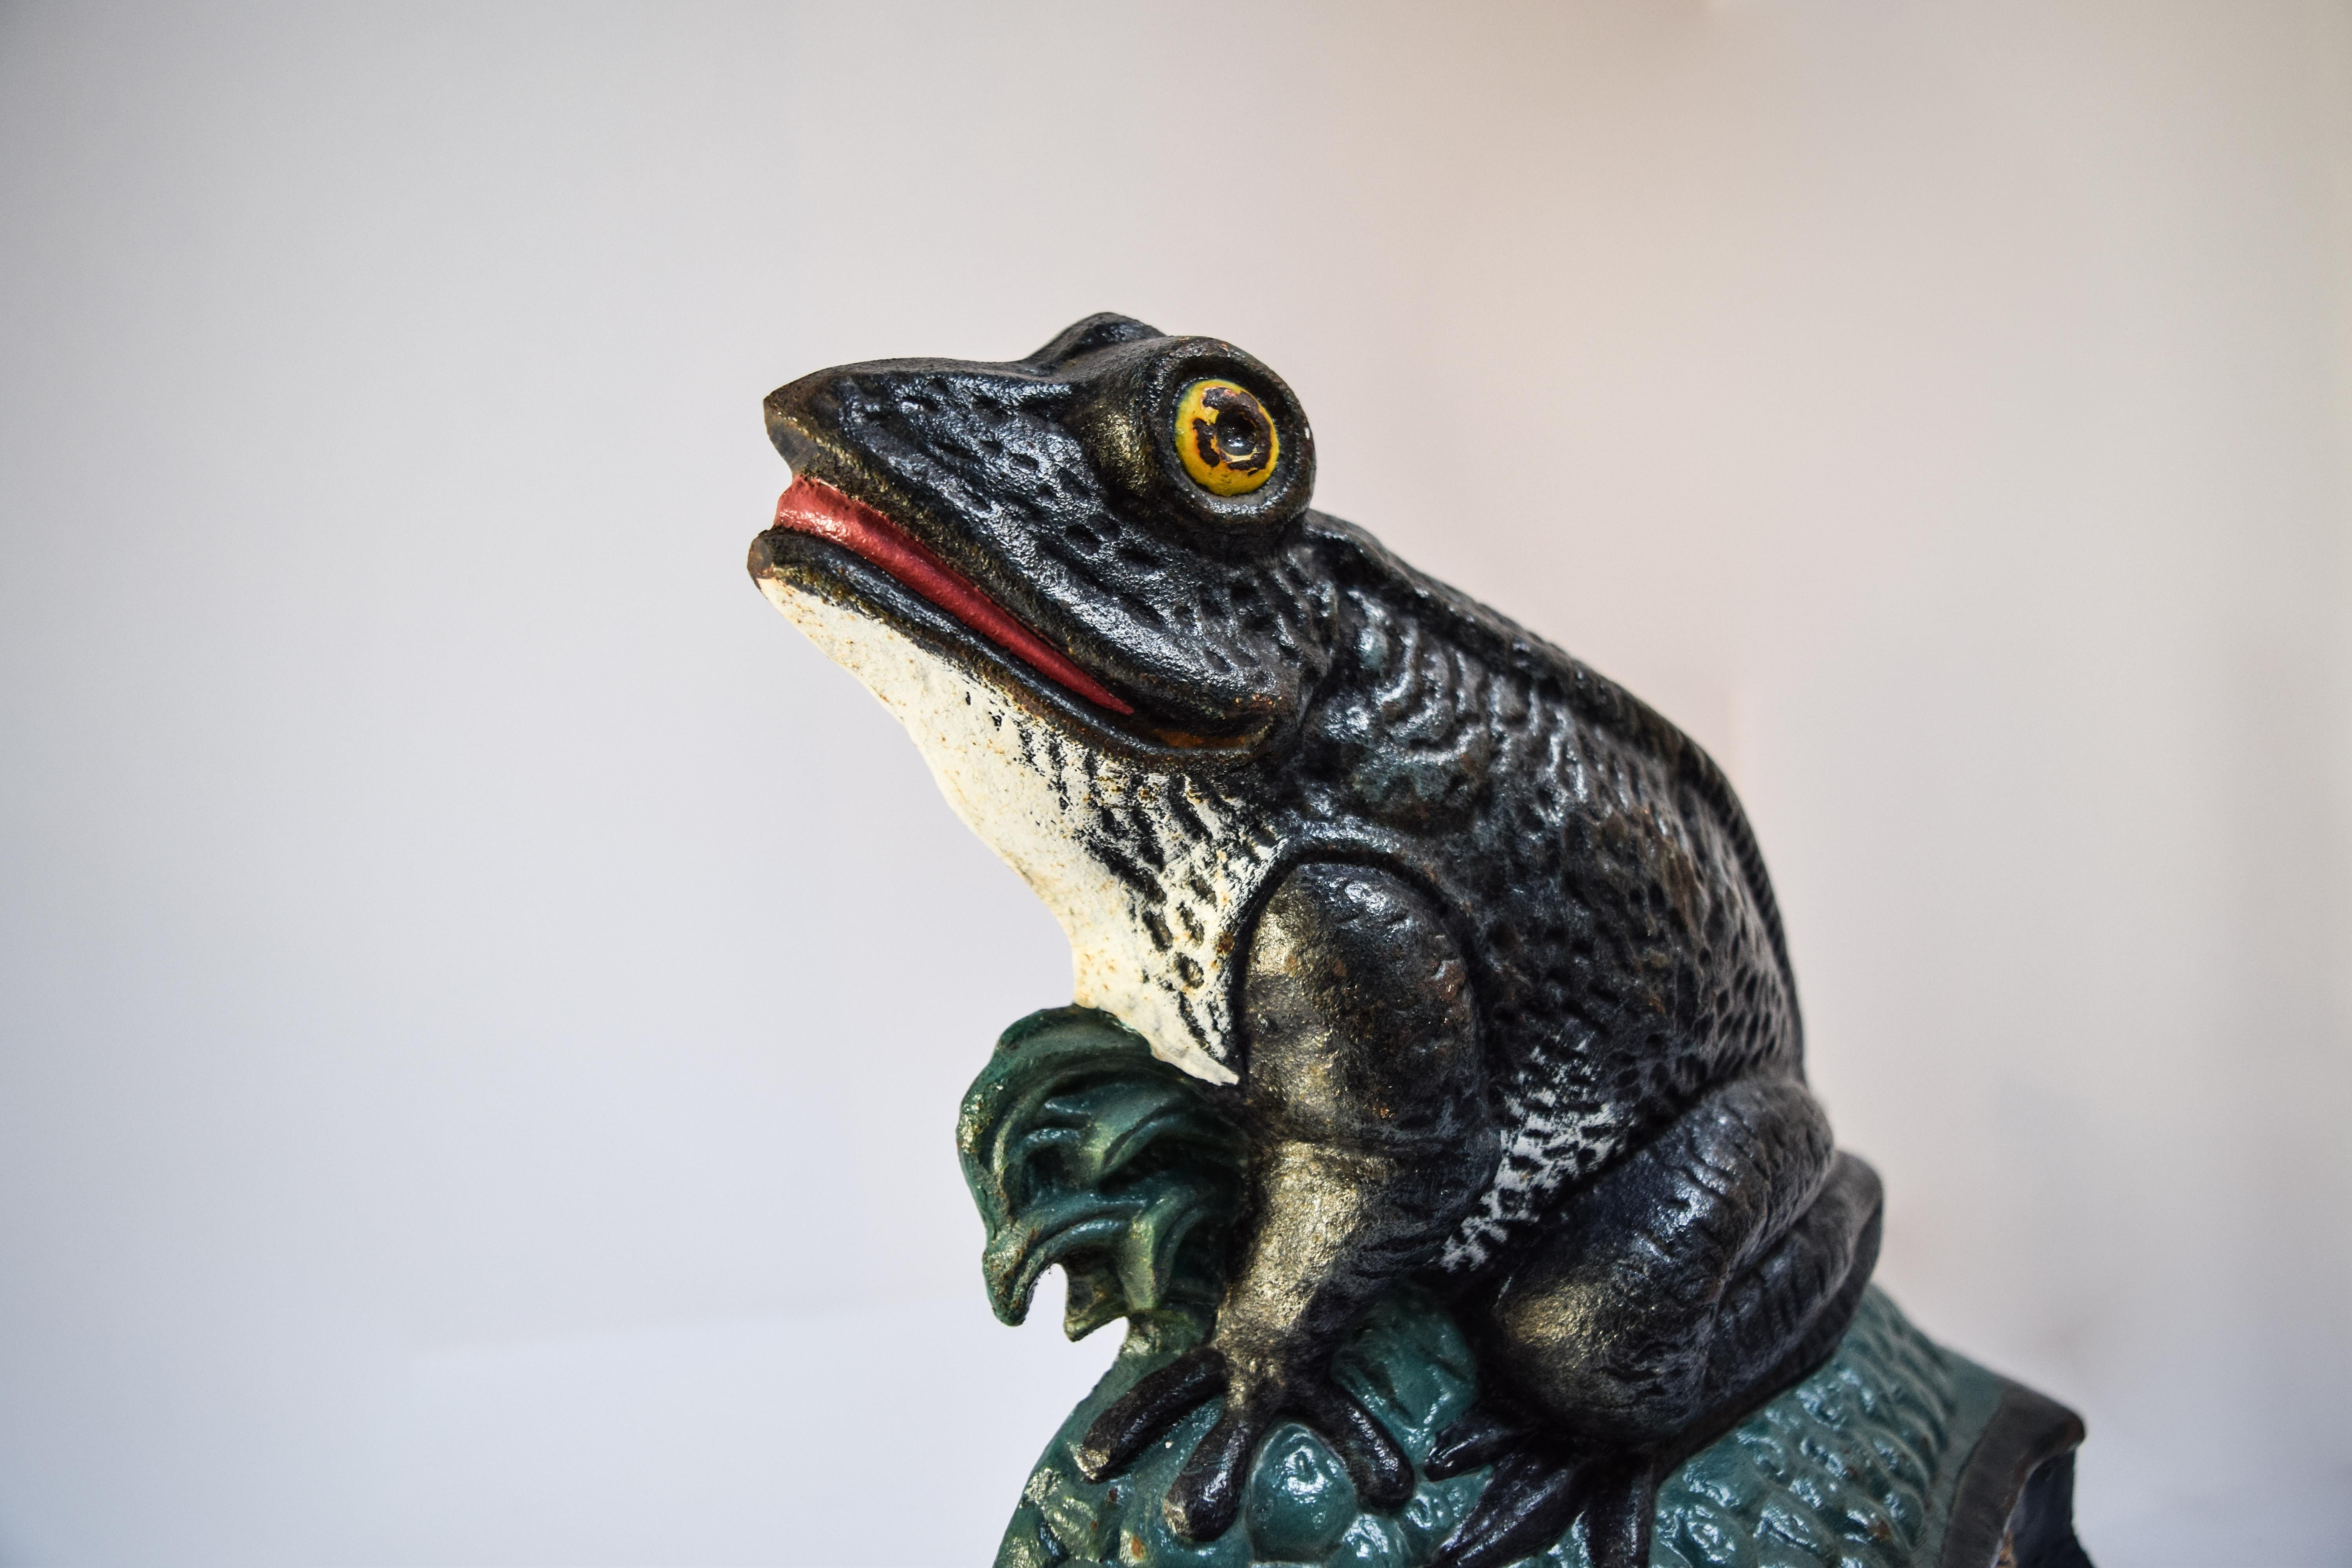 brass frog bookends